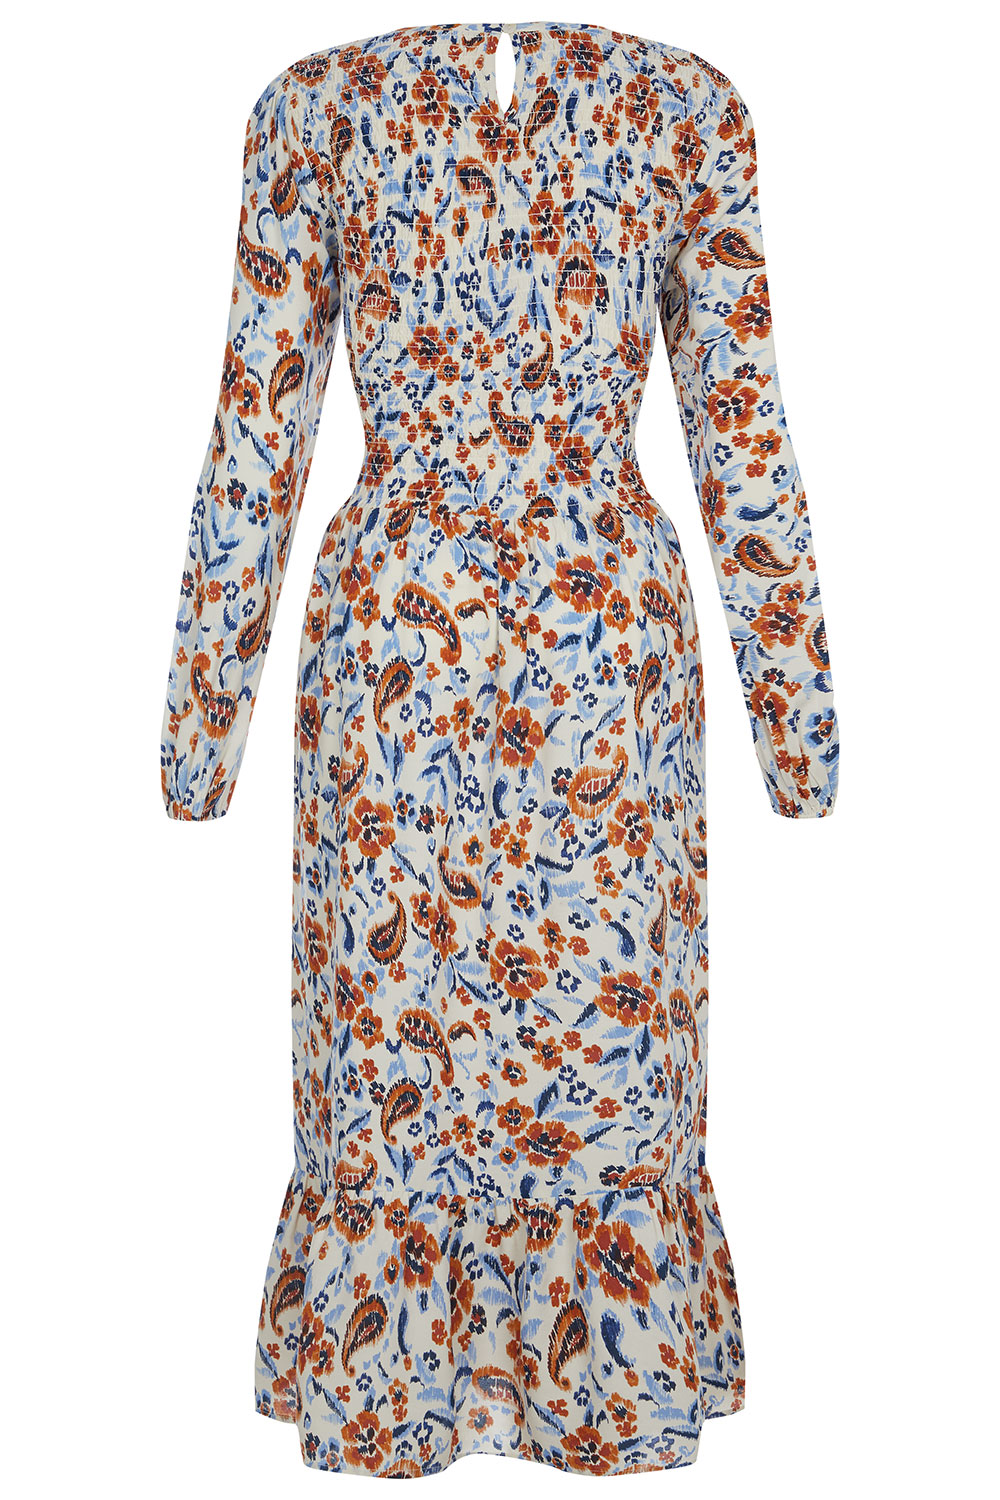 Be The Buyer at Bonmarche Summer Dresses – JacquardFlower